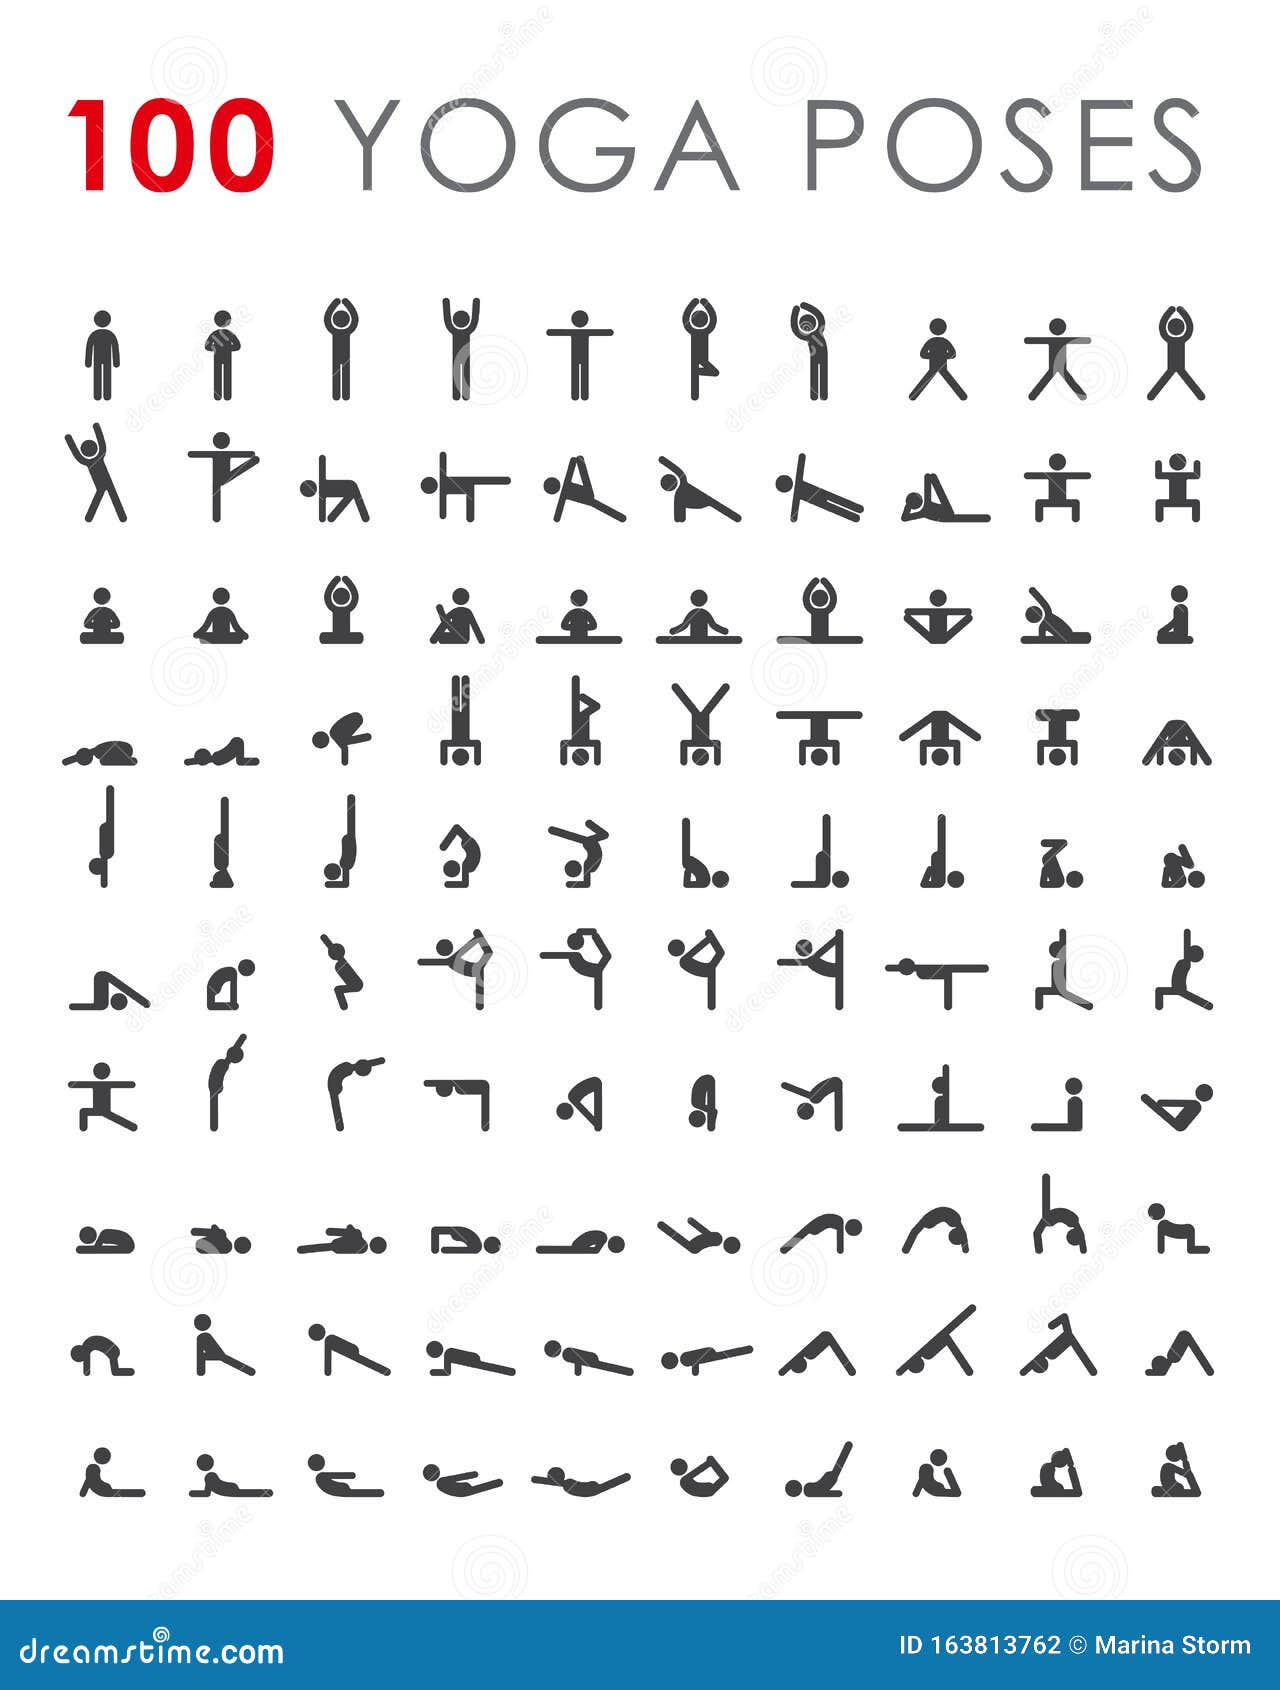 QuickFit Yoga Poses Poster - Beginner Yoga Position Chart - English and  Sanskrit Names - Double Sided (Laminated, 18